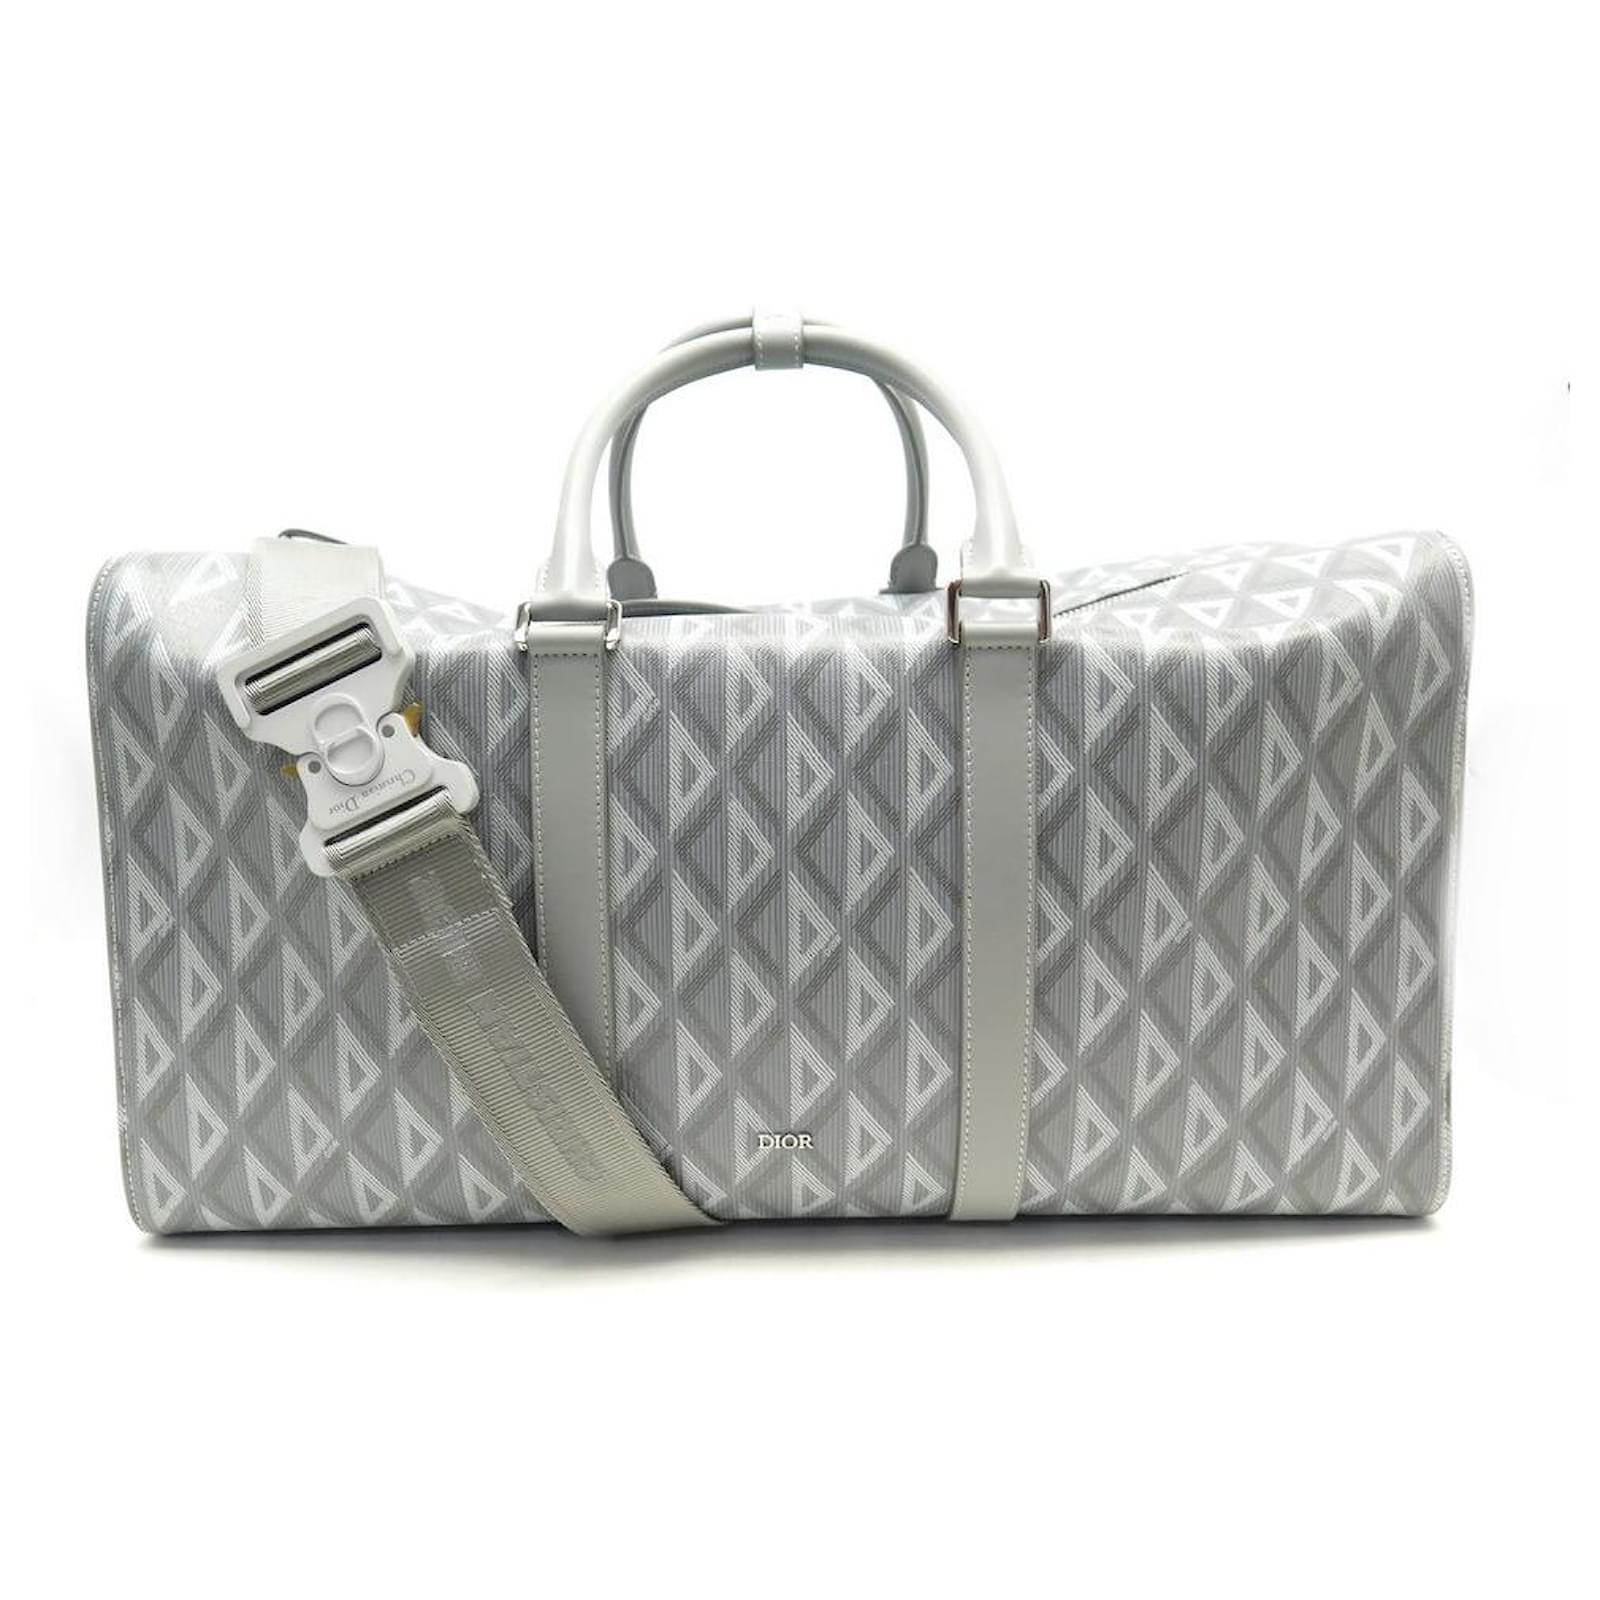 NEW DIOR INGOT TRAVEL BAG 50 IN GRAY CD CANVAS NEW GRAY CANVAS BAG